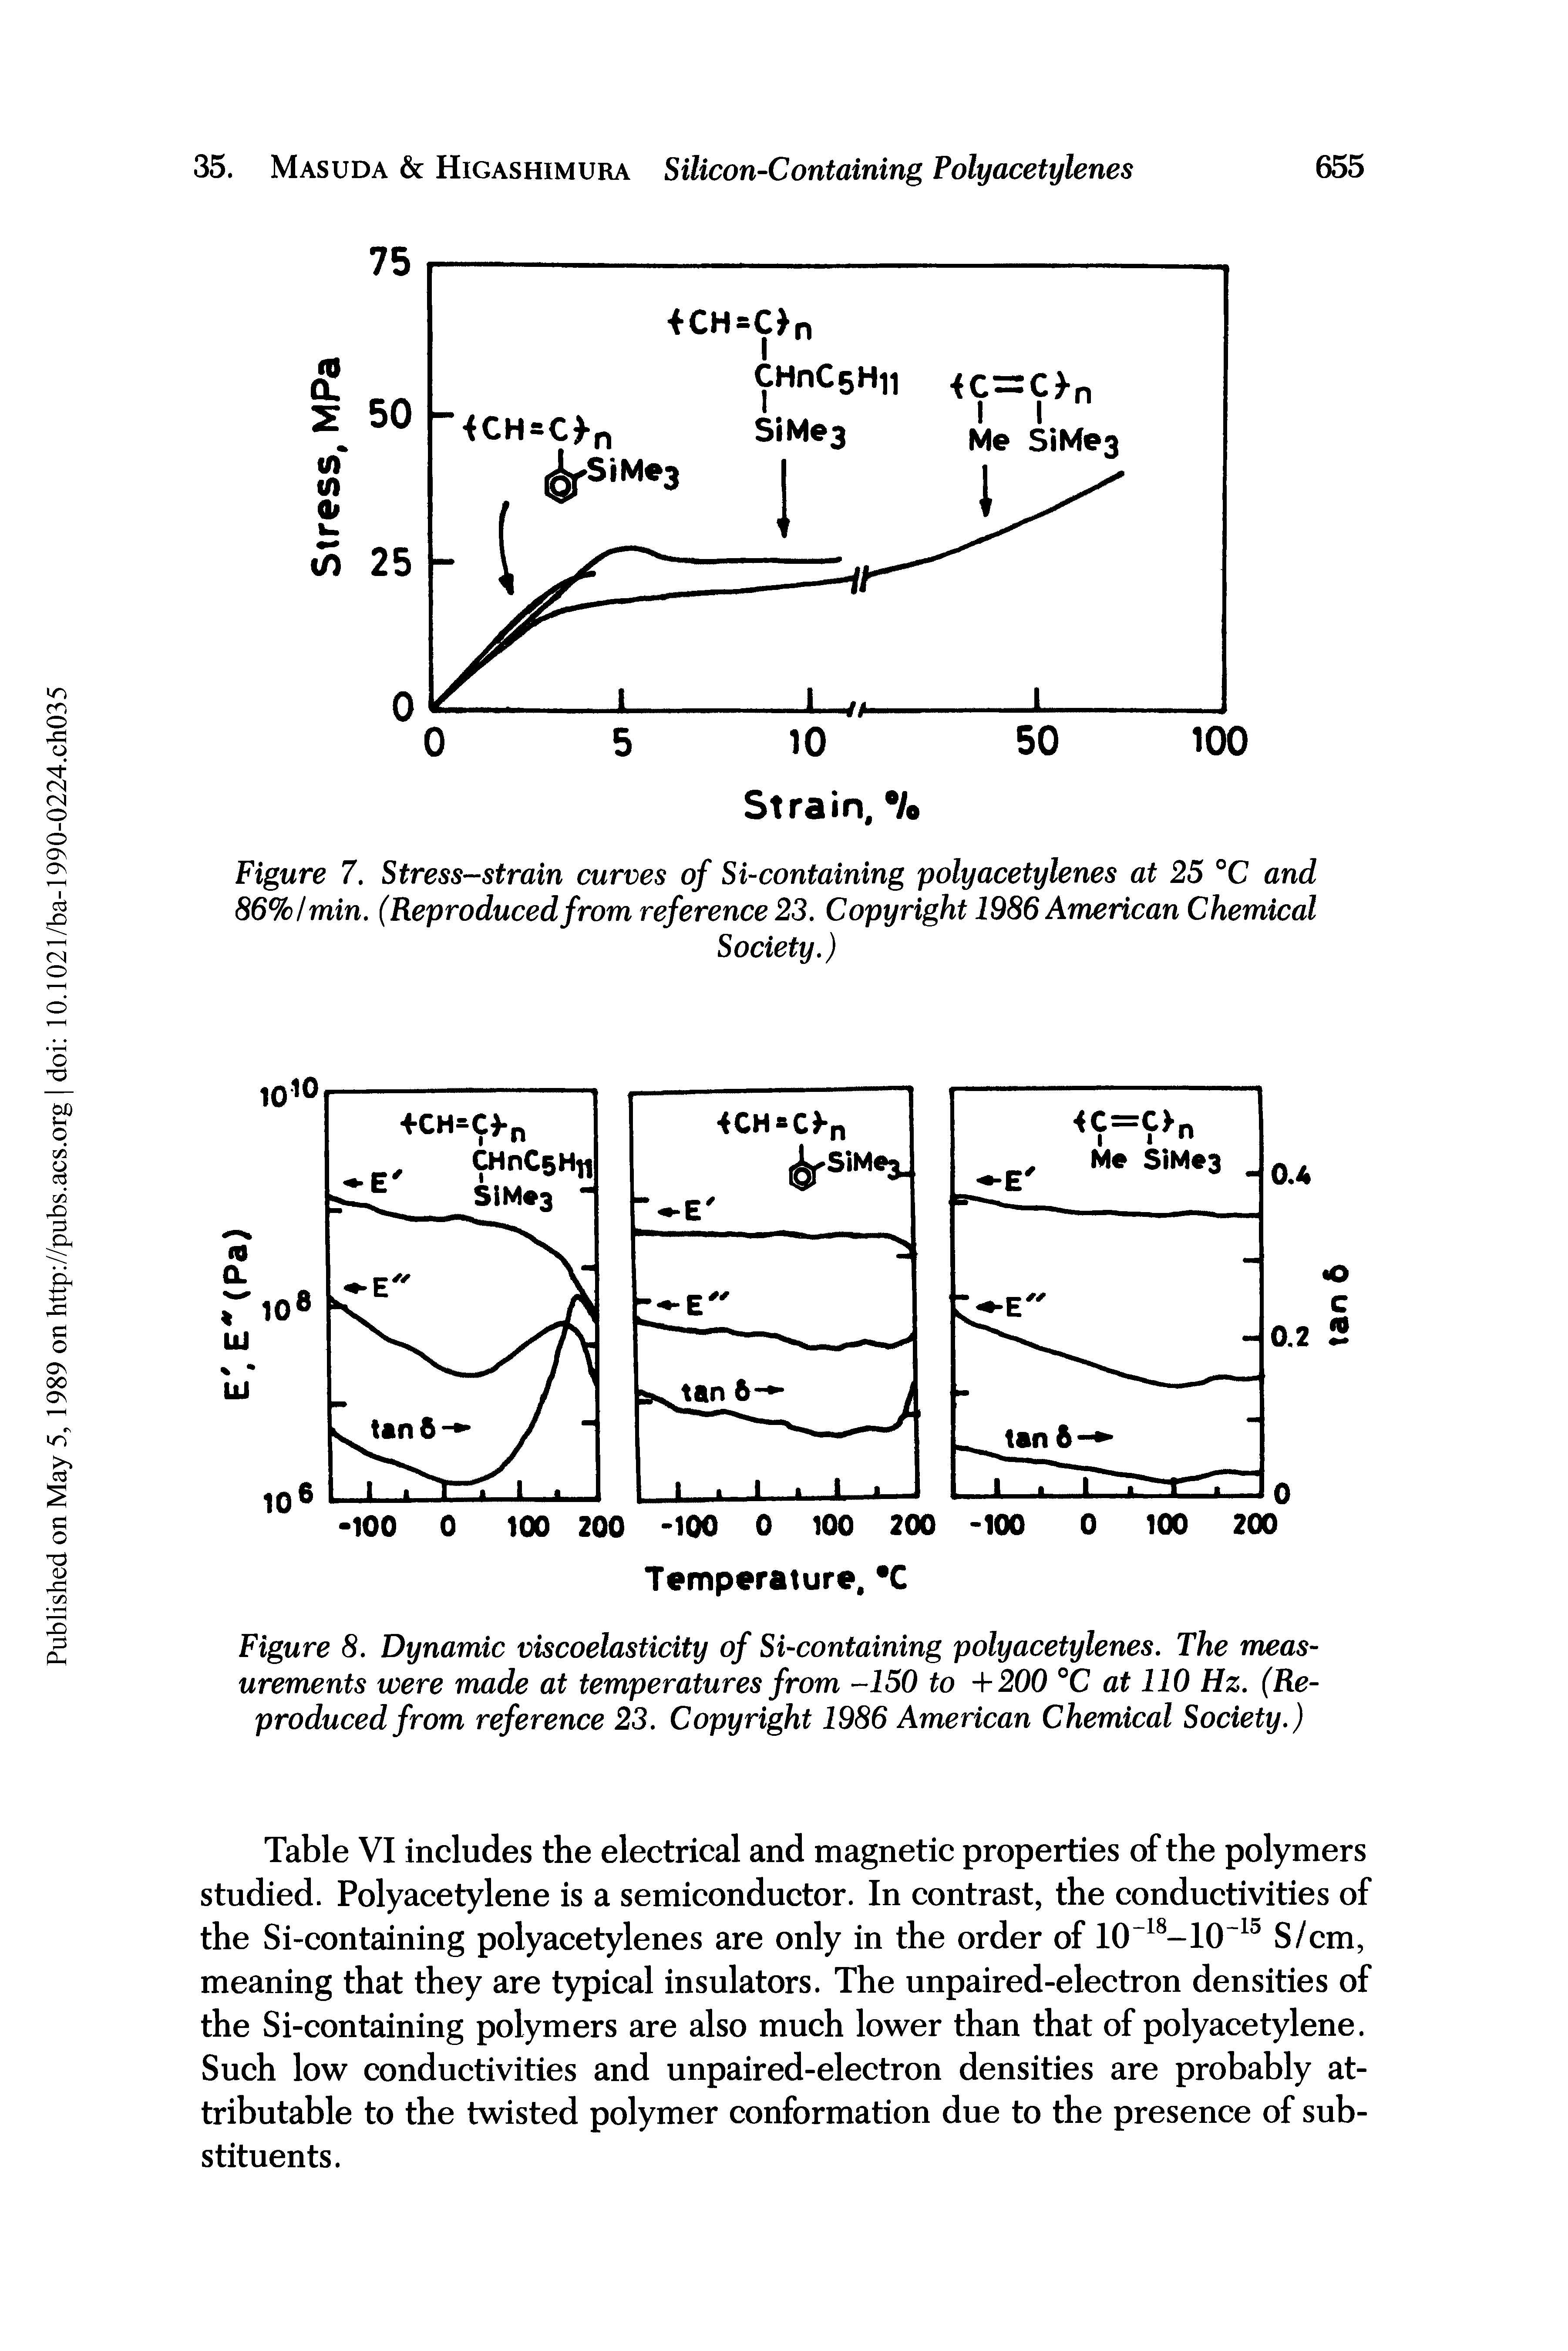 Figure 7. Stress-strain curves of Si-containing poly acetylenes at 25 °C and 86% I min. (Reproduced from reference 23. Copyright 1986 American Chemical...